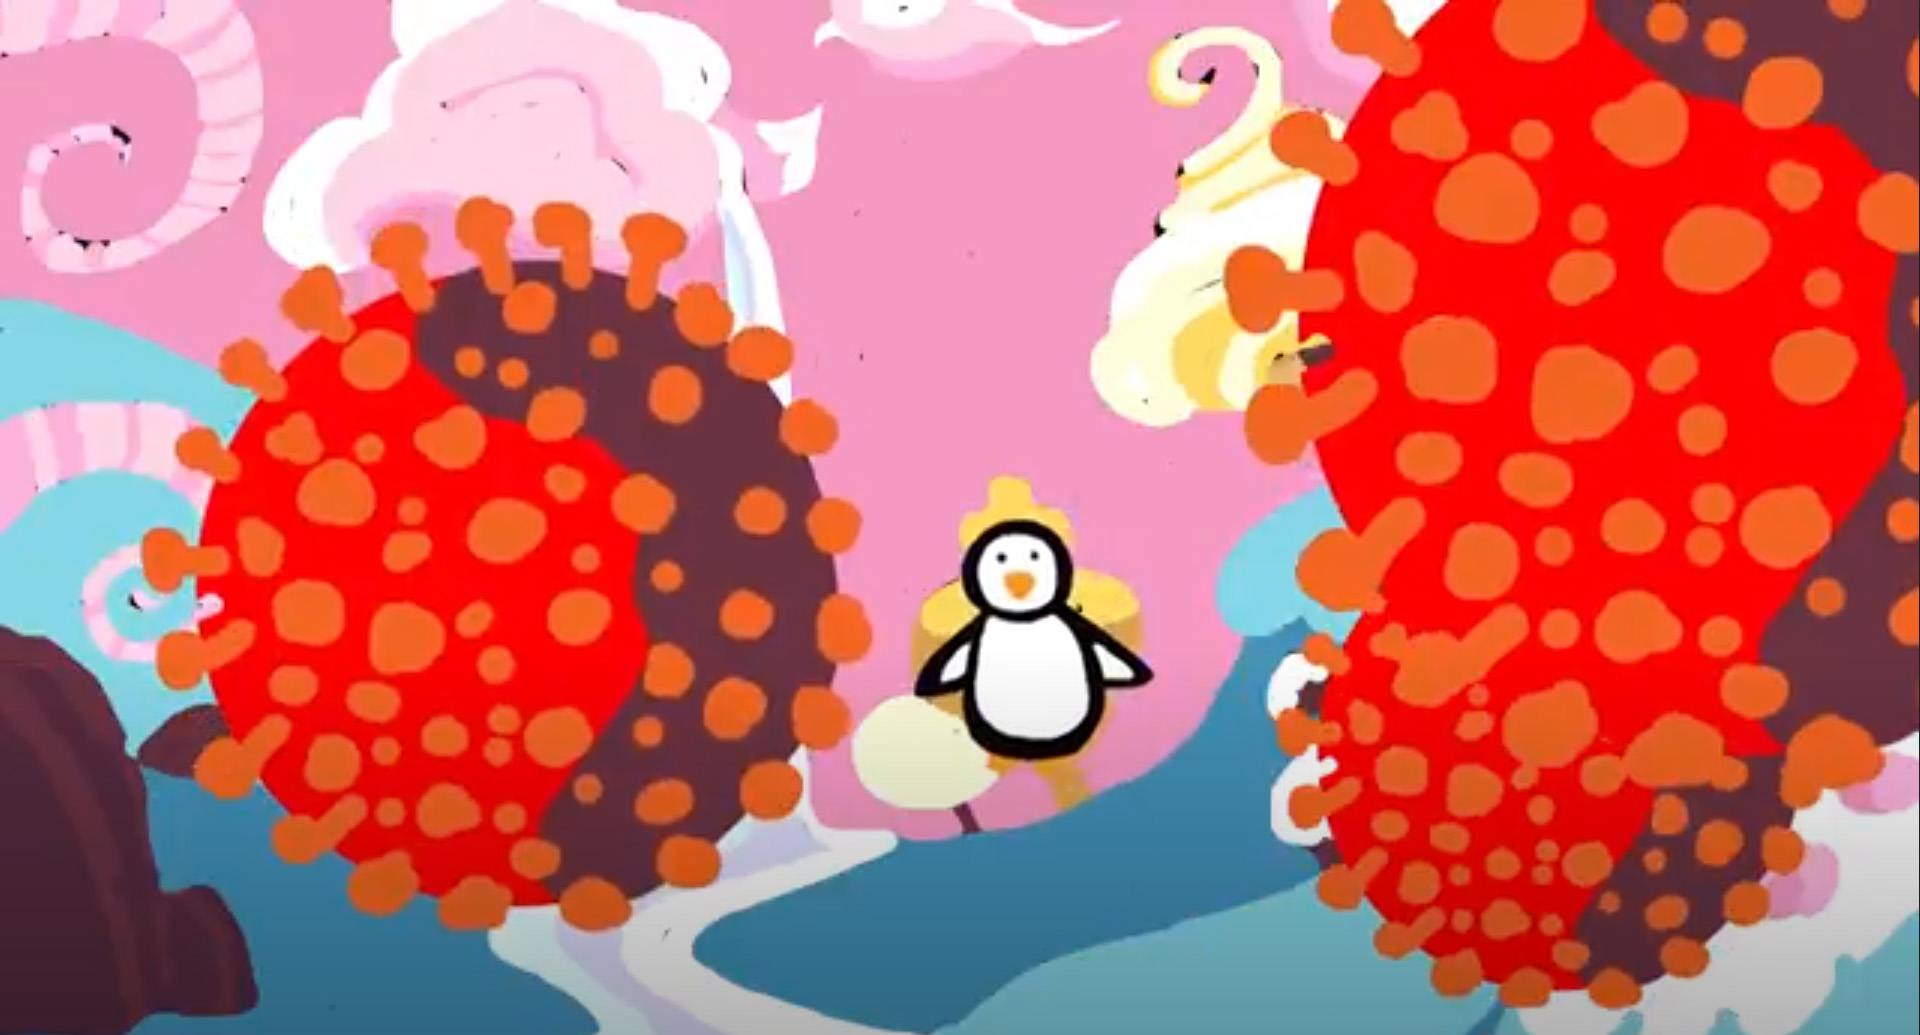 small birdy figure in a cheerful yet threatening landscape of brightly color spheroids reminiscent of viruses